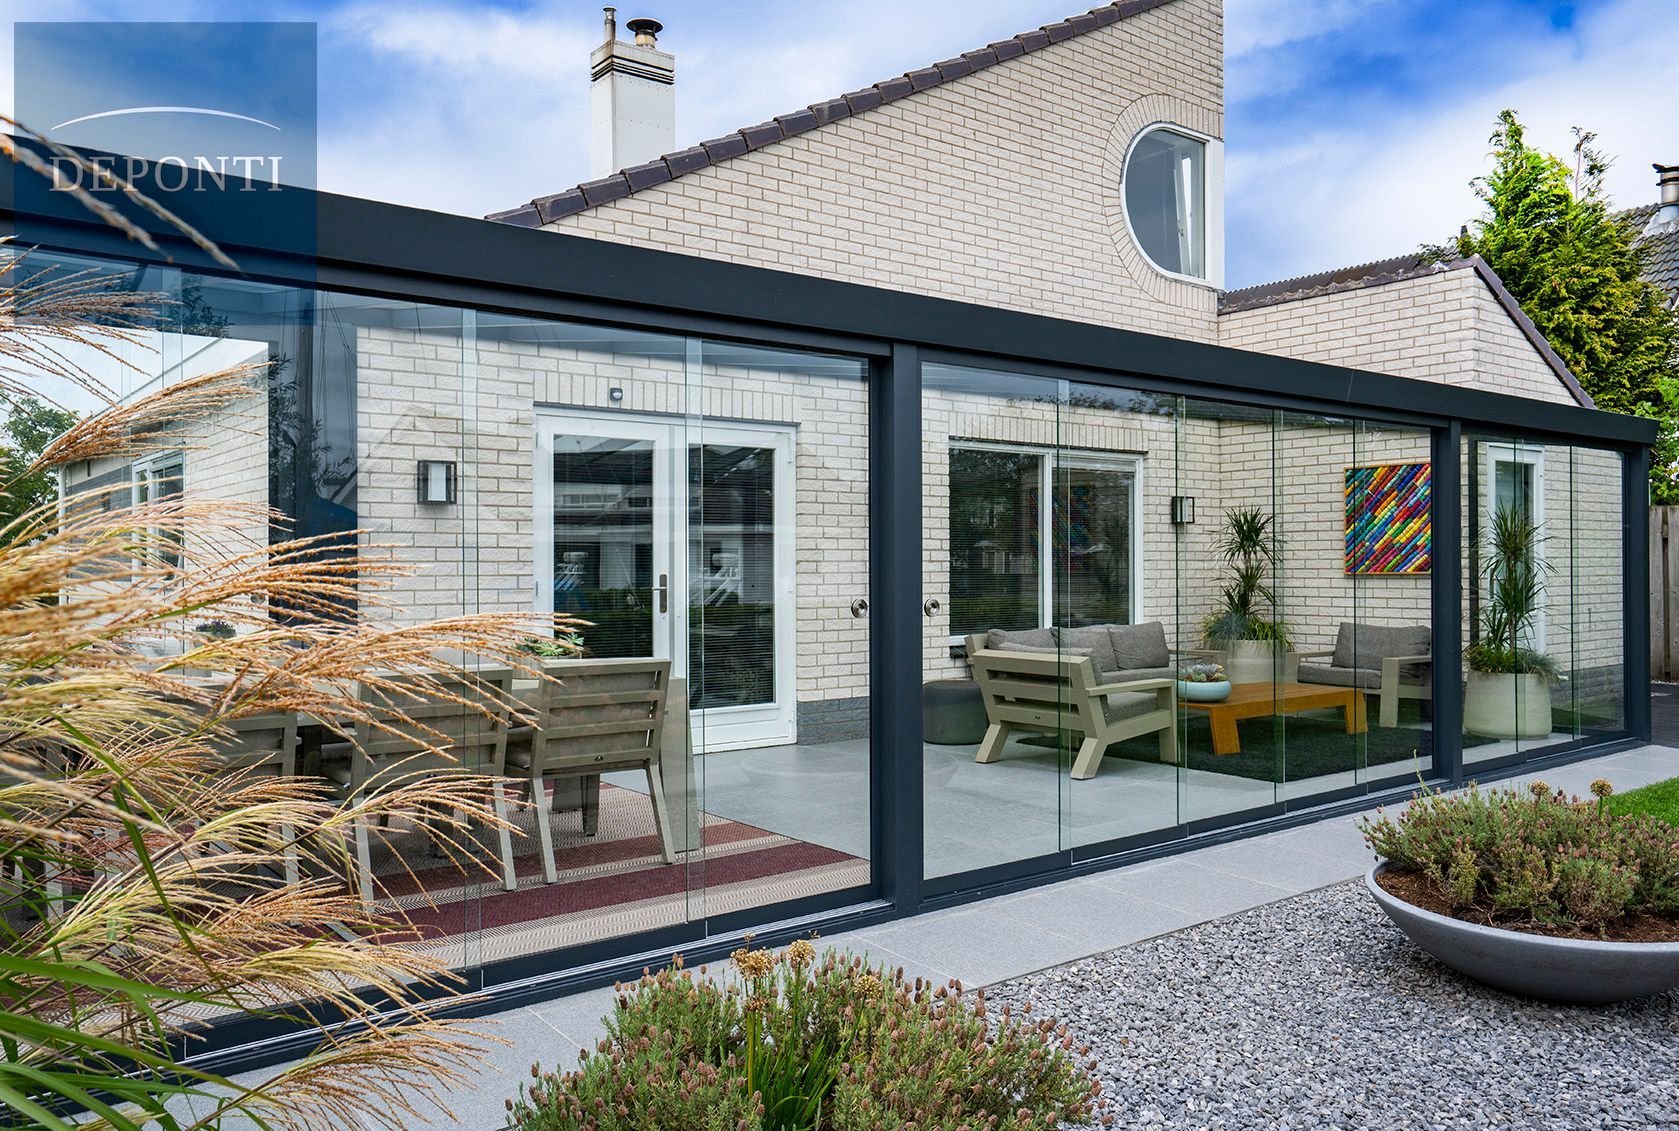 Premium Deponti aluminium veranda with glass sliding panels to the side and front and a table and chairs under the canopy